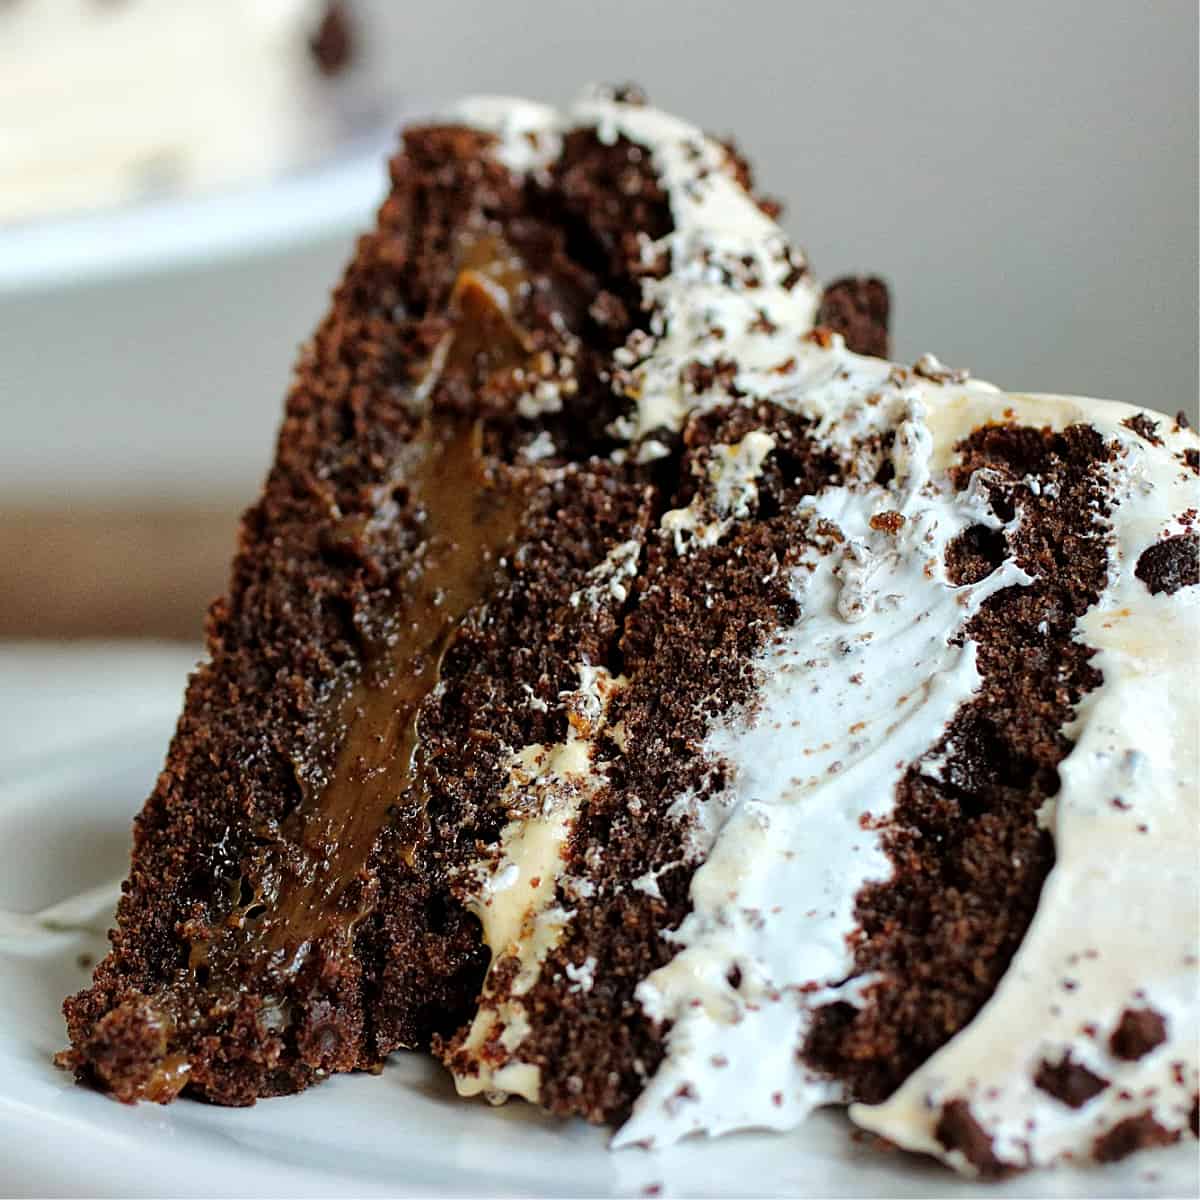 Close-up of chocolate layer cake filled with dulce de leche and meringue.